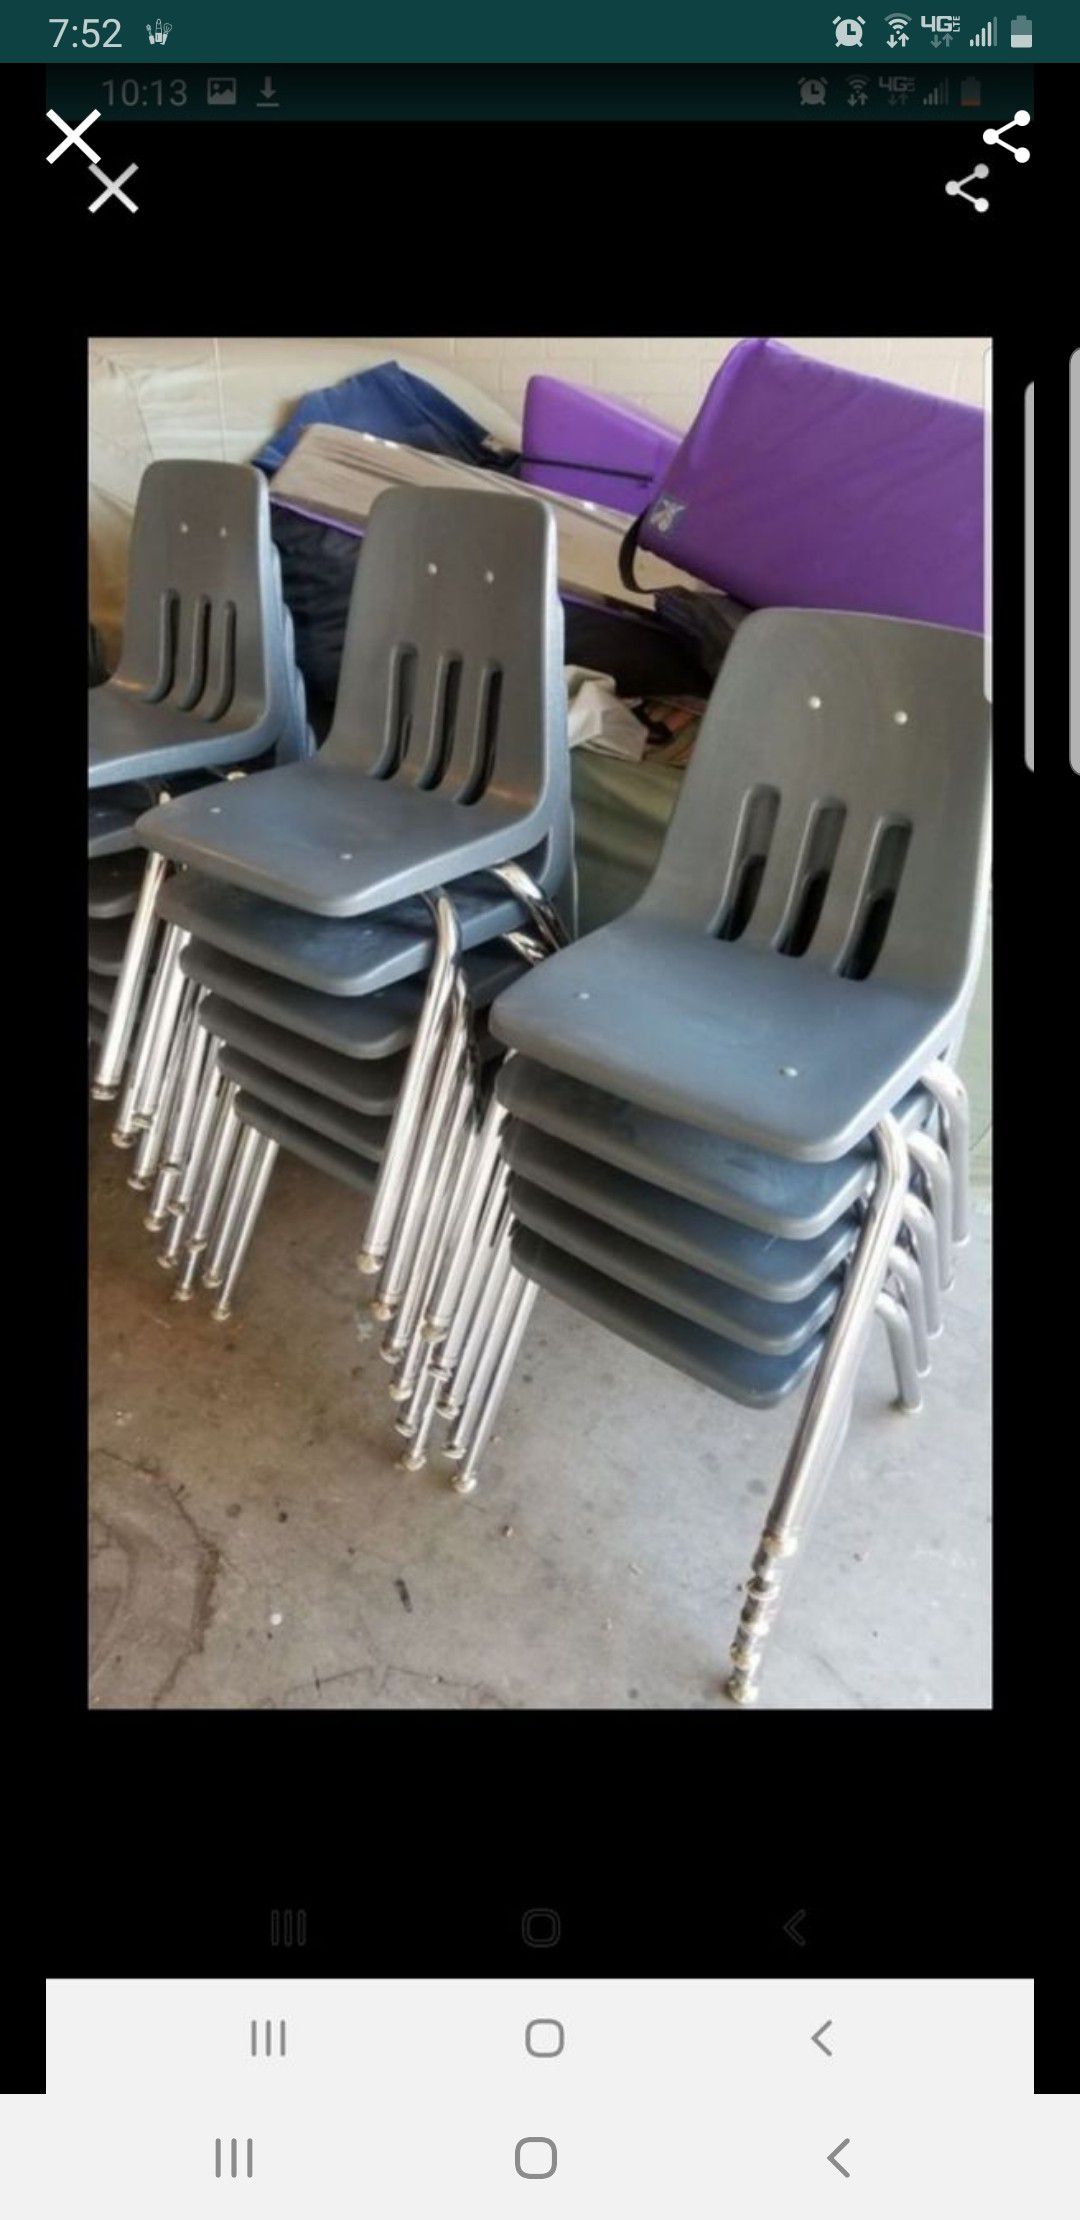 10 Gray kids Professional Quality Heavy duty daycare home schooling homeschooling preschool or school chairs available at $9 EACH